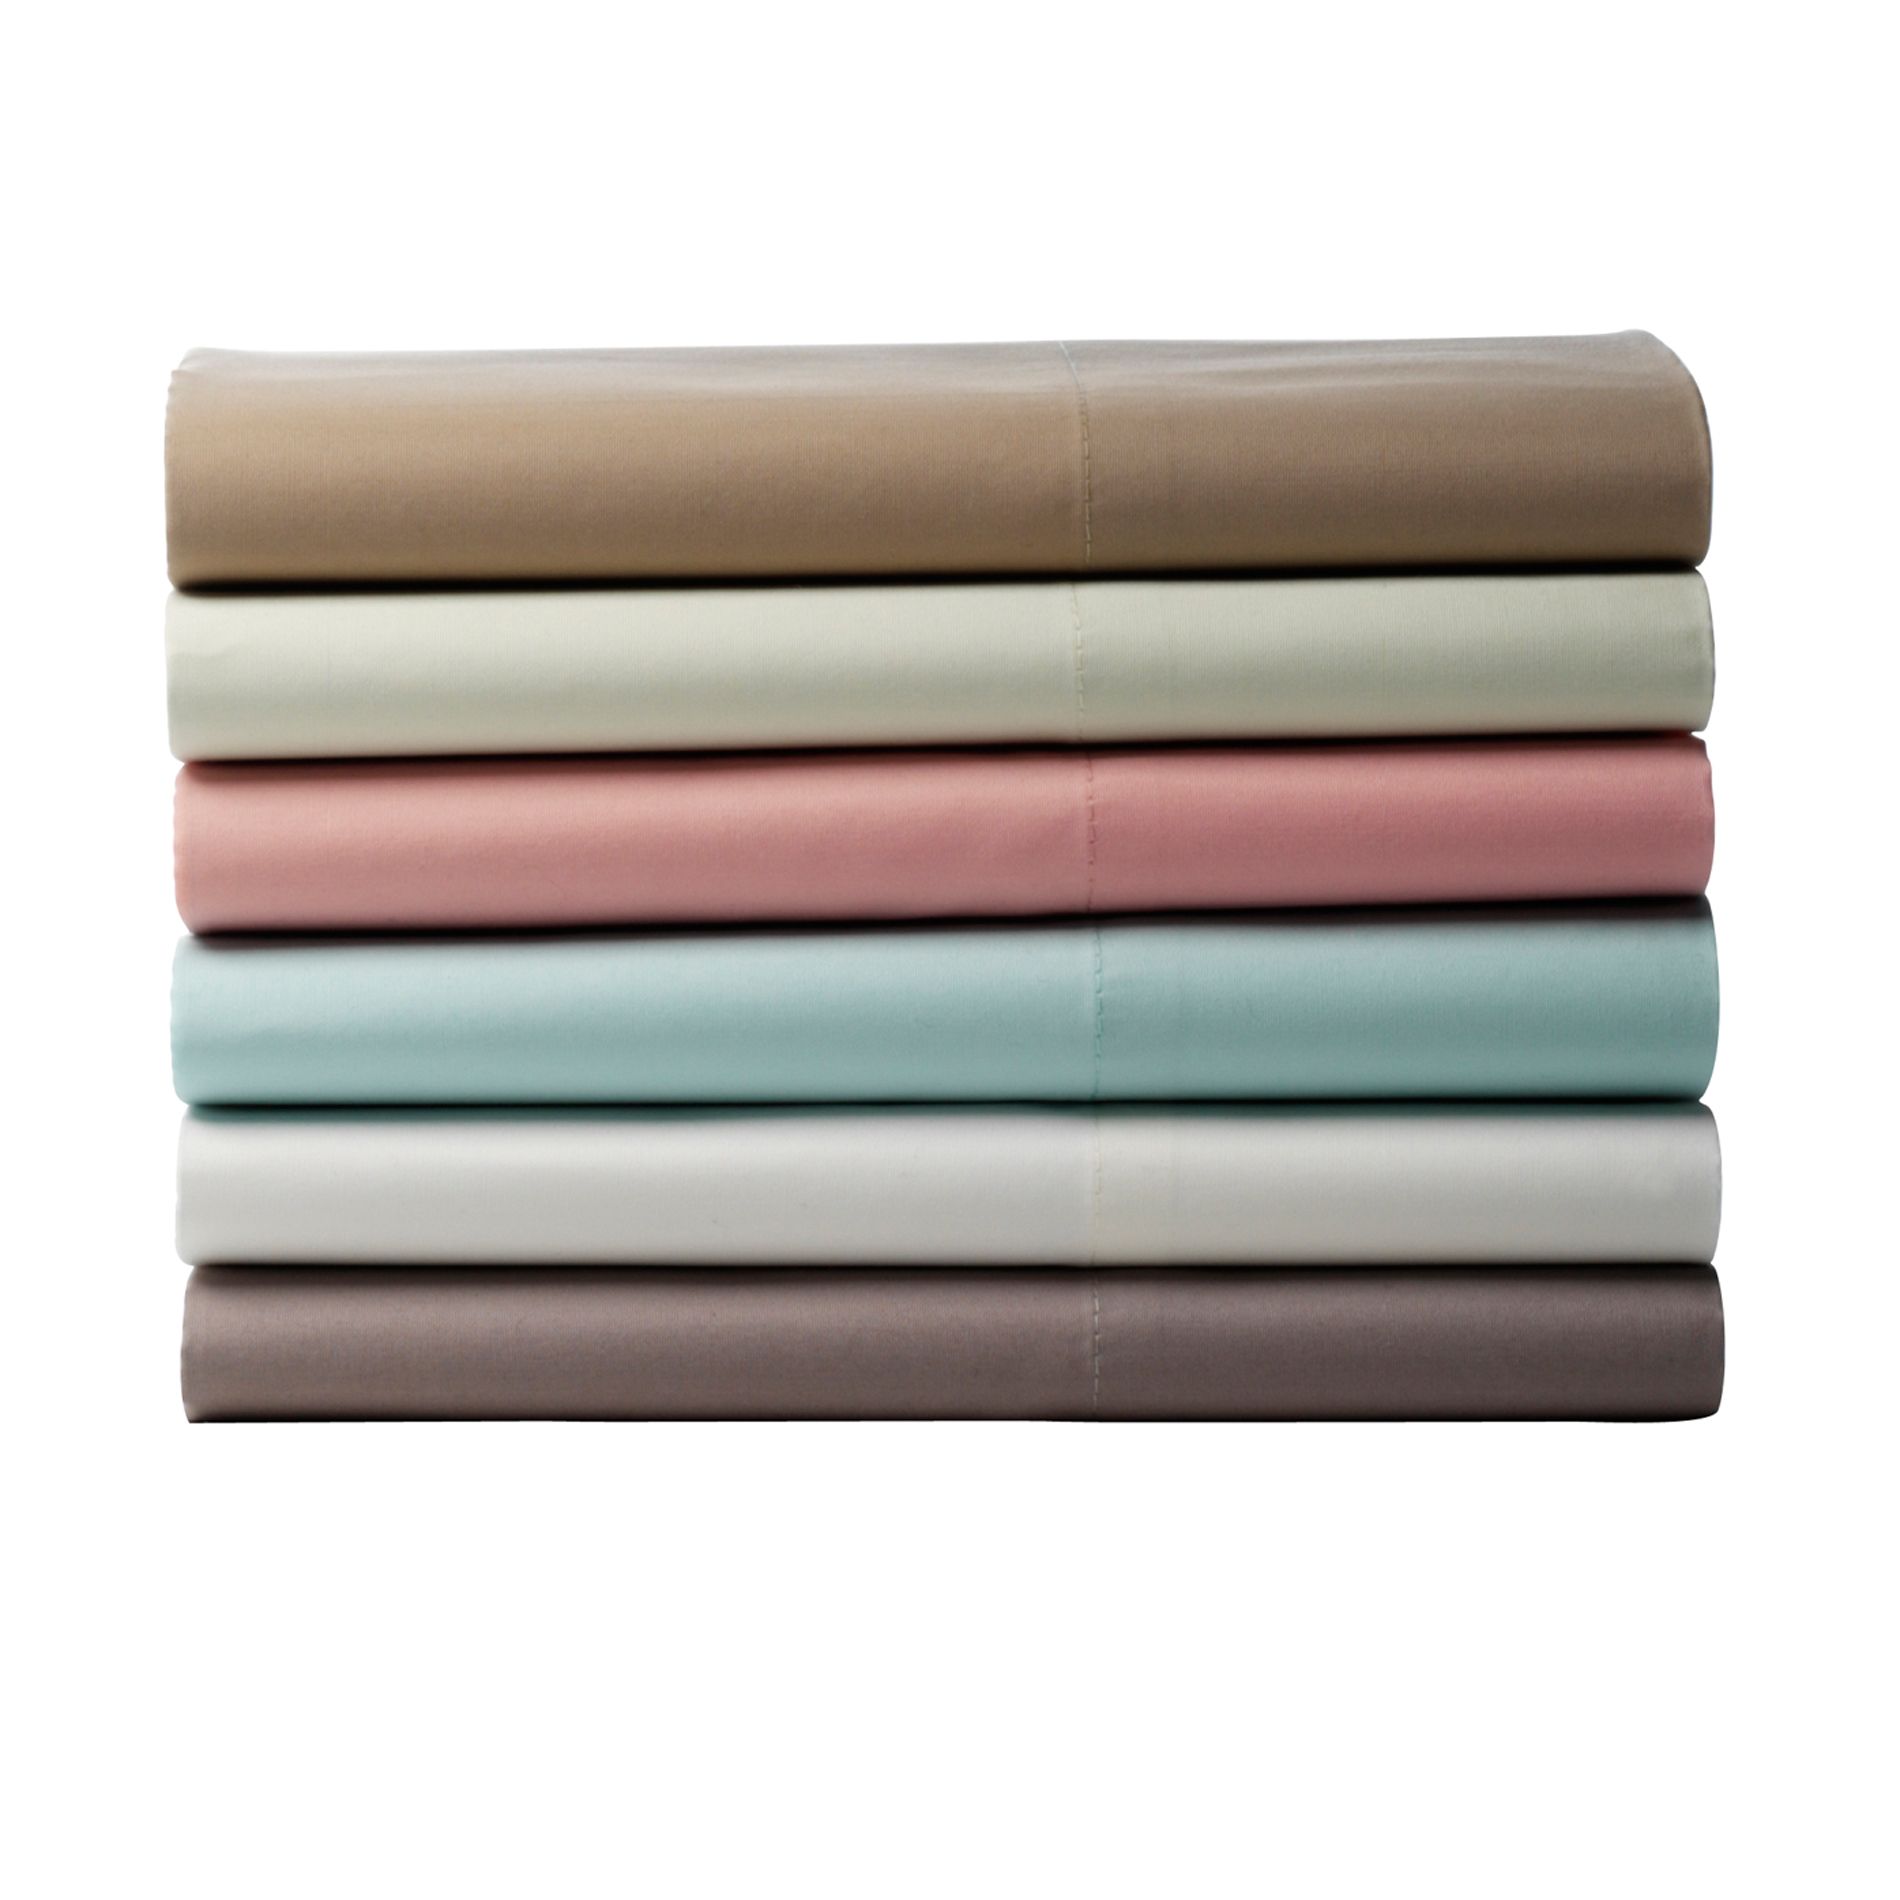 Jaclyn Smith 300 Thread Count Wrinkle Free Pillowcase